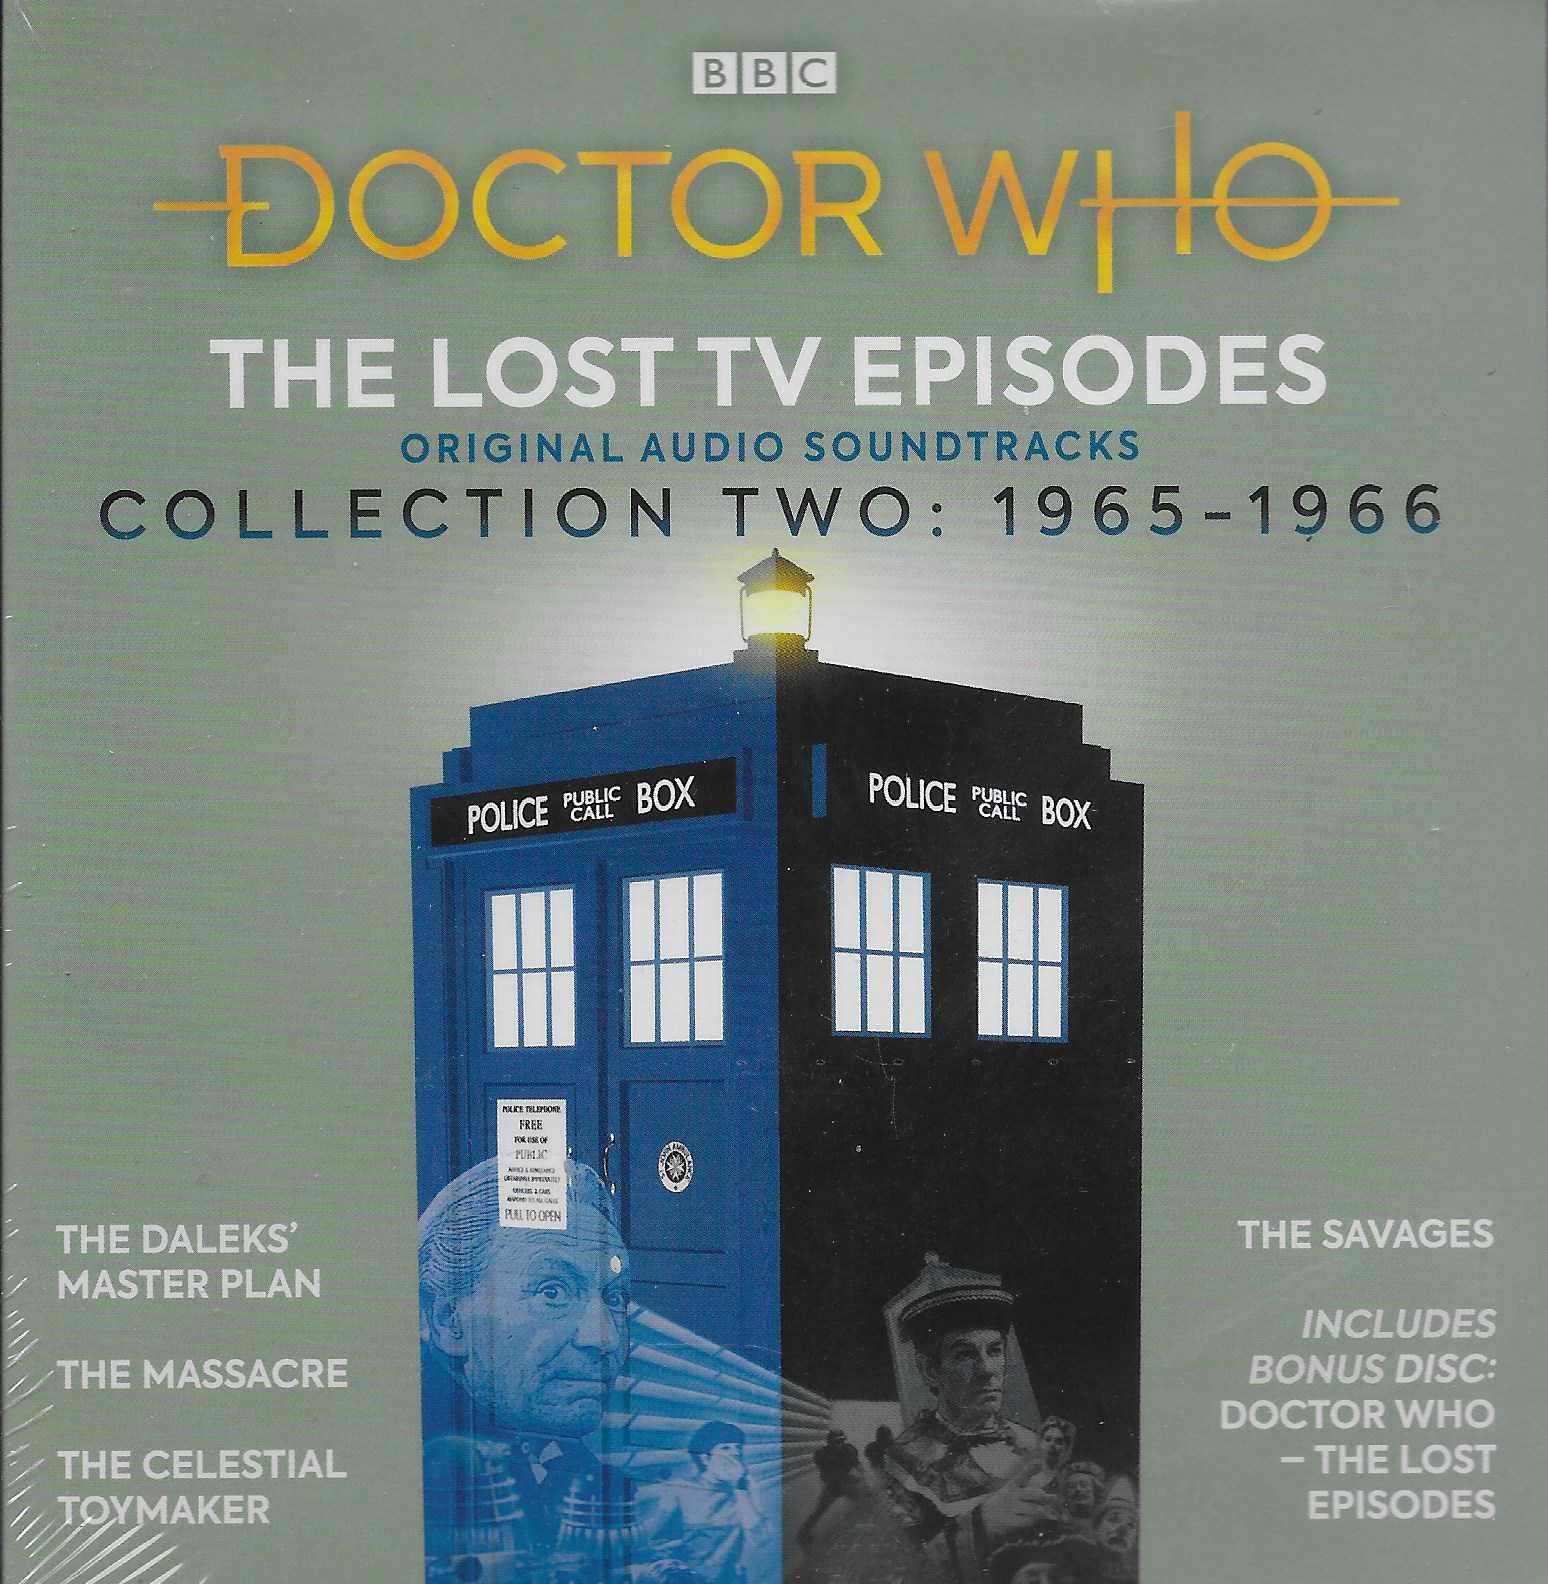 Picture of ISBN 978-1-78753-750-7 Doctor Who - The lost TV episodes - Collection two: 1965-1966 by artist Various from the BBC cds - Records and Tapes library